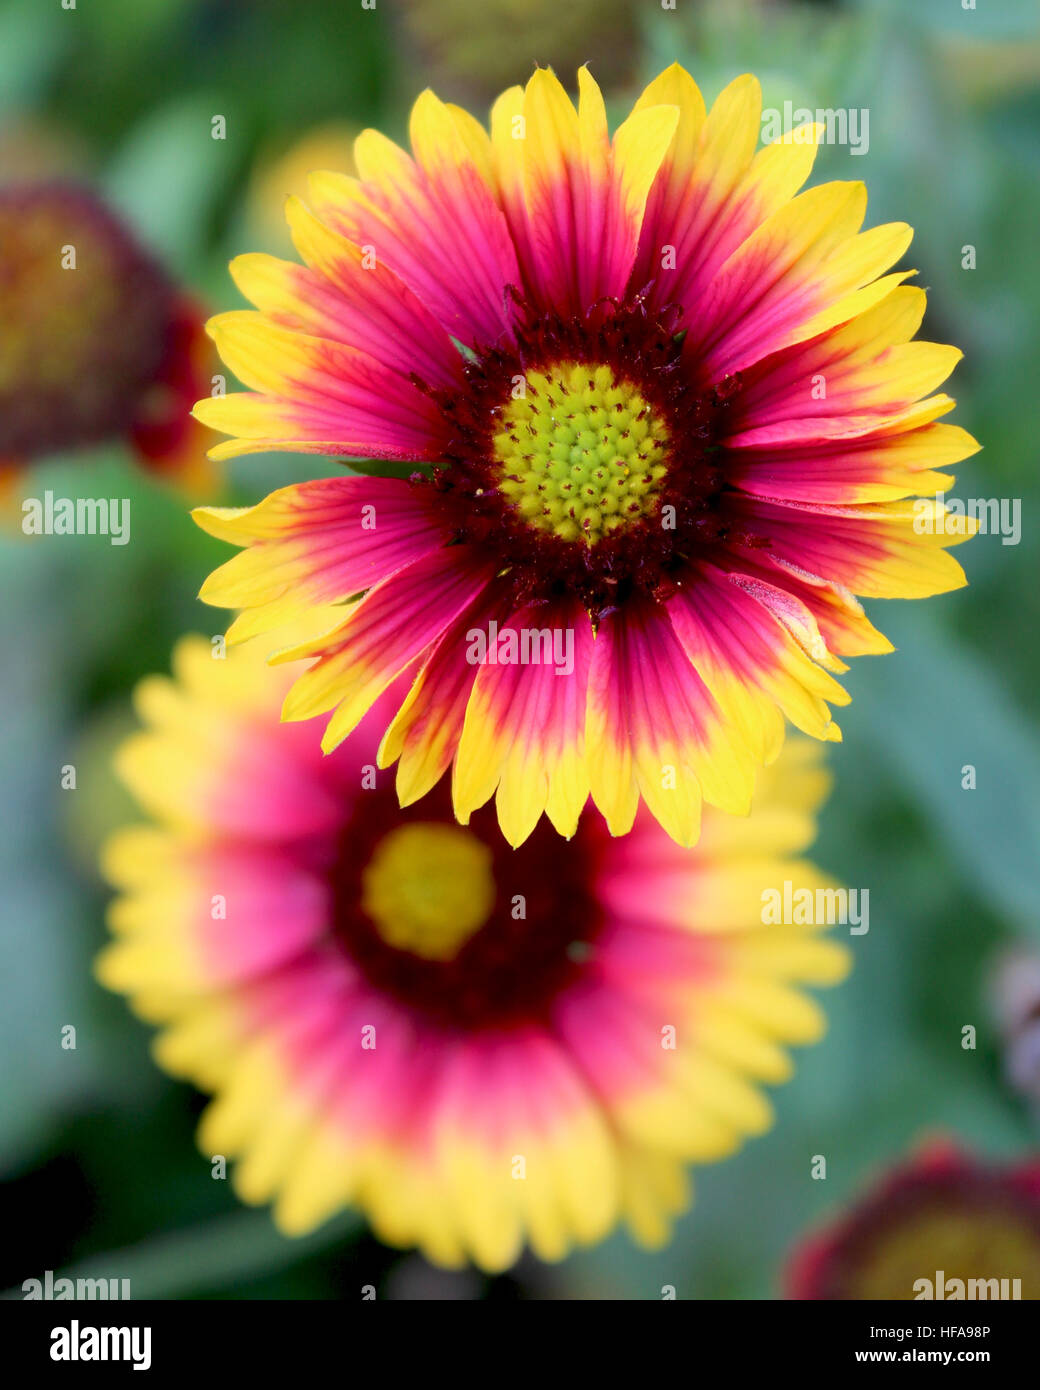 The bright yellow and red flowers of Gaillardia pulchella 'Picta' also known as Blanket Flower. Stock Photo